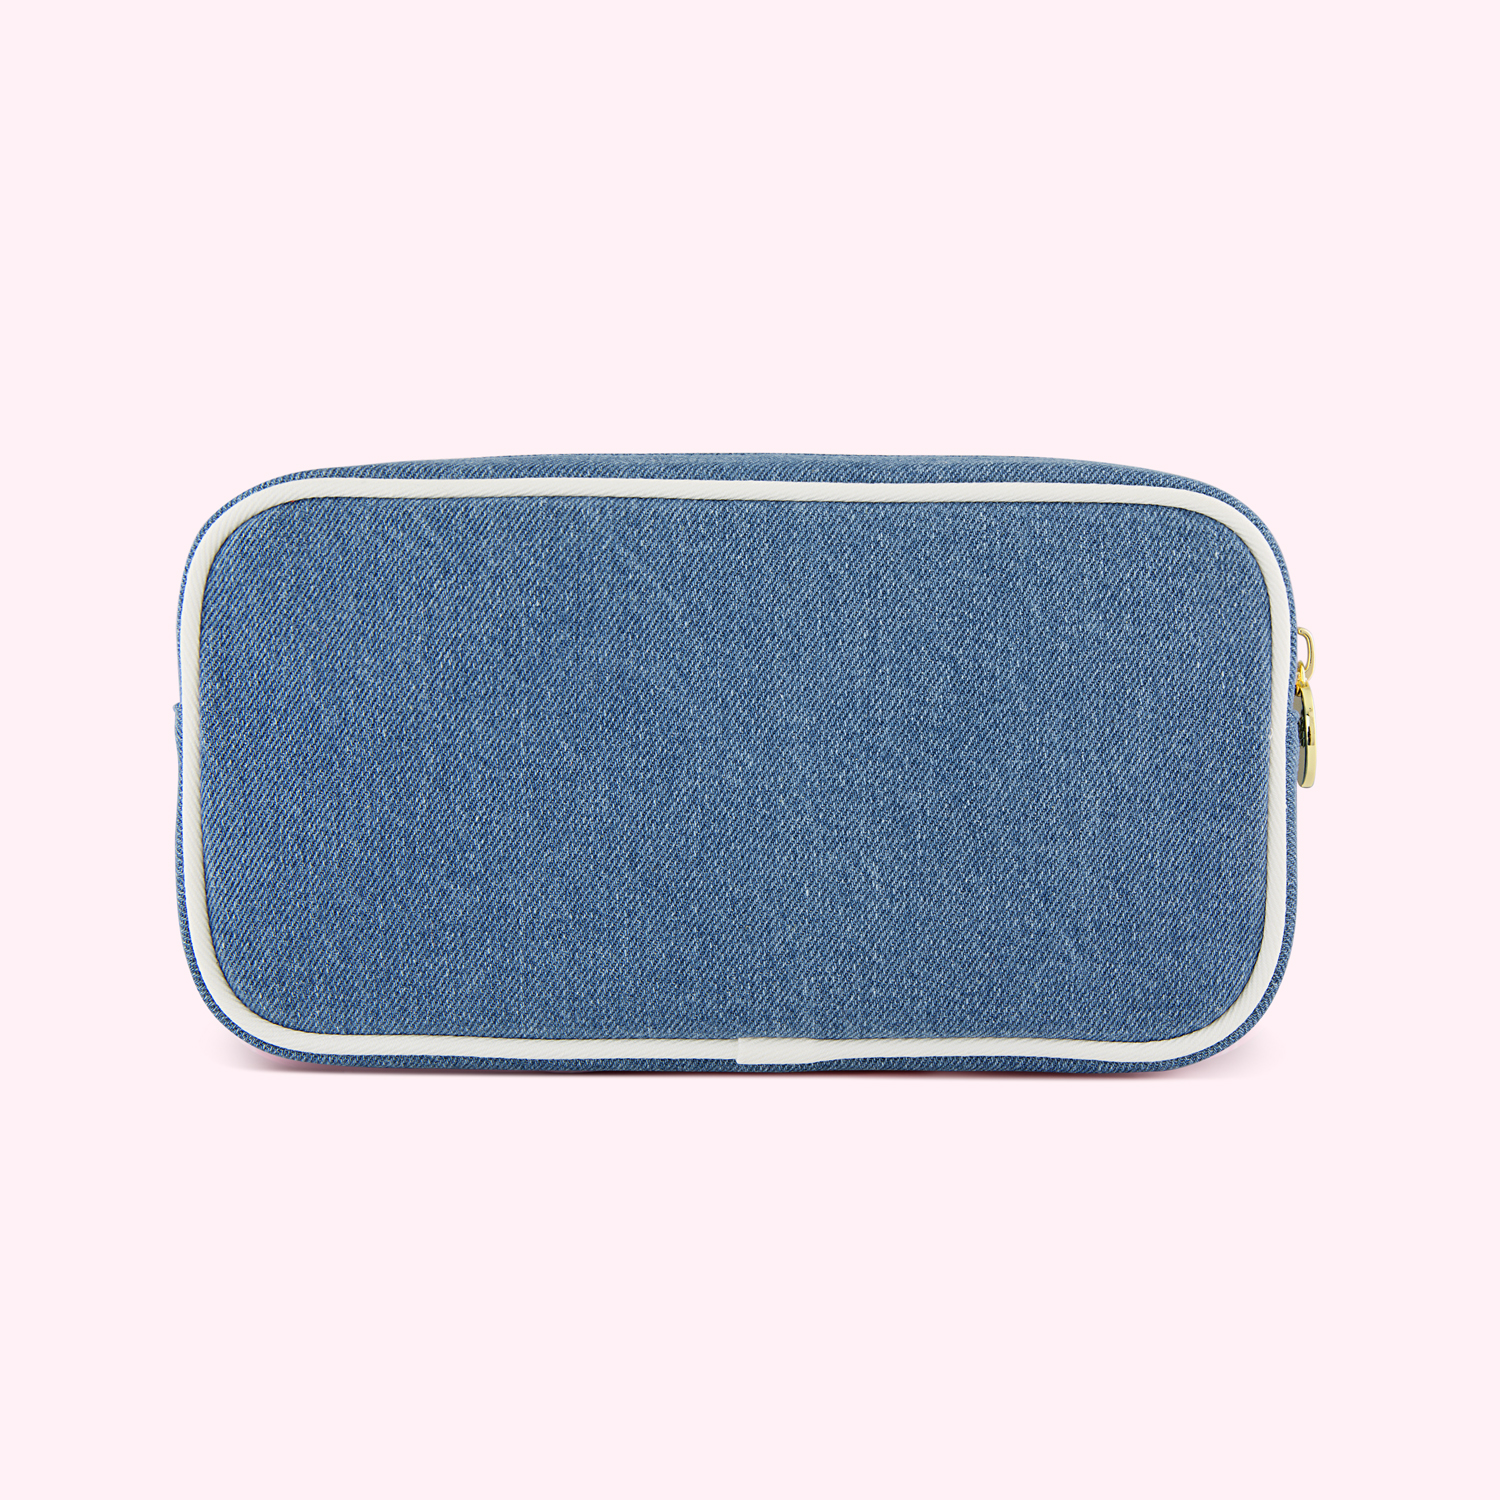 Denim Coin Purse of Recycled Jeans Light Blue 